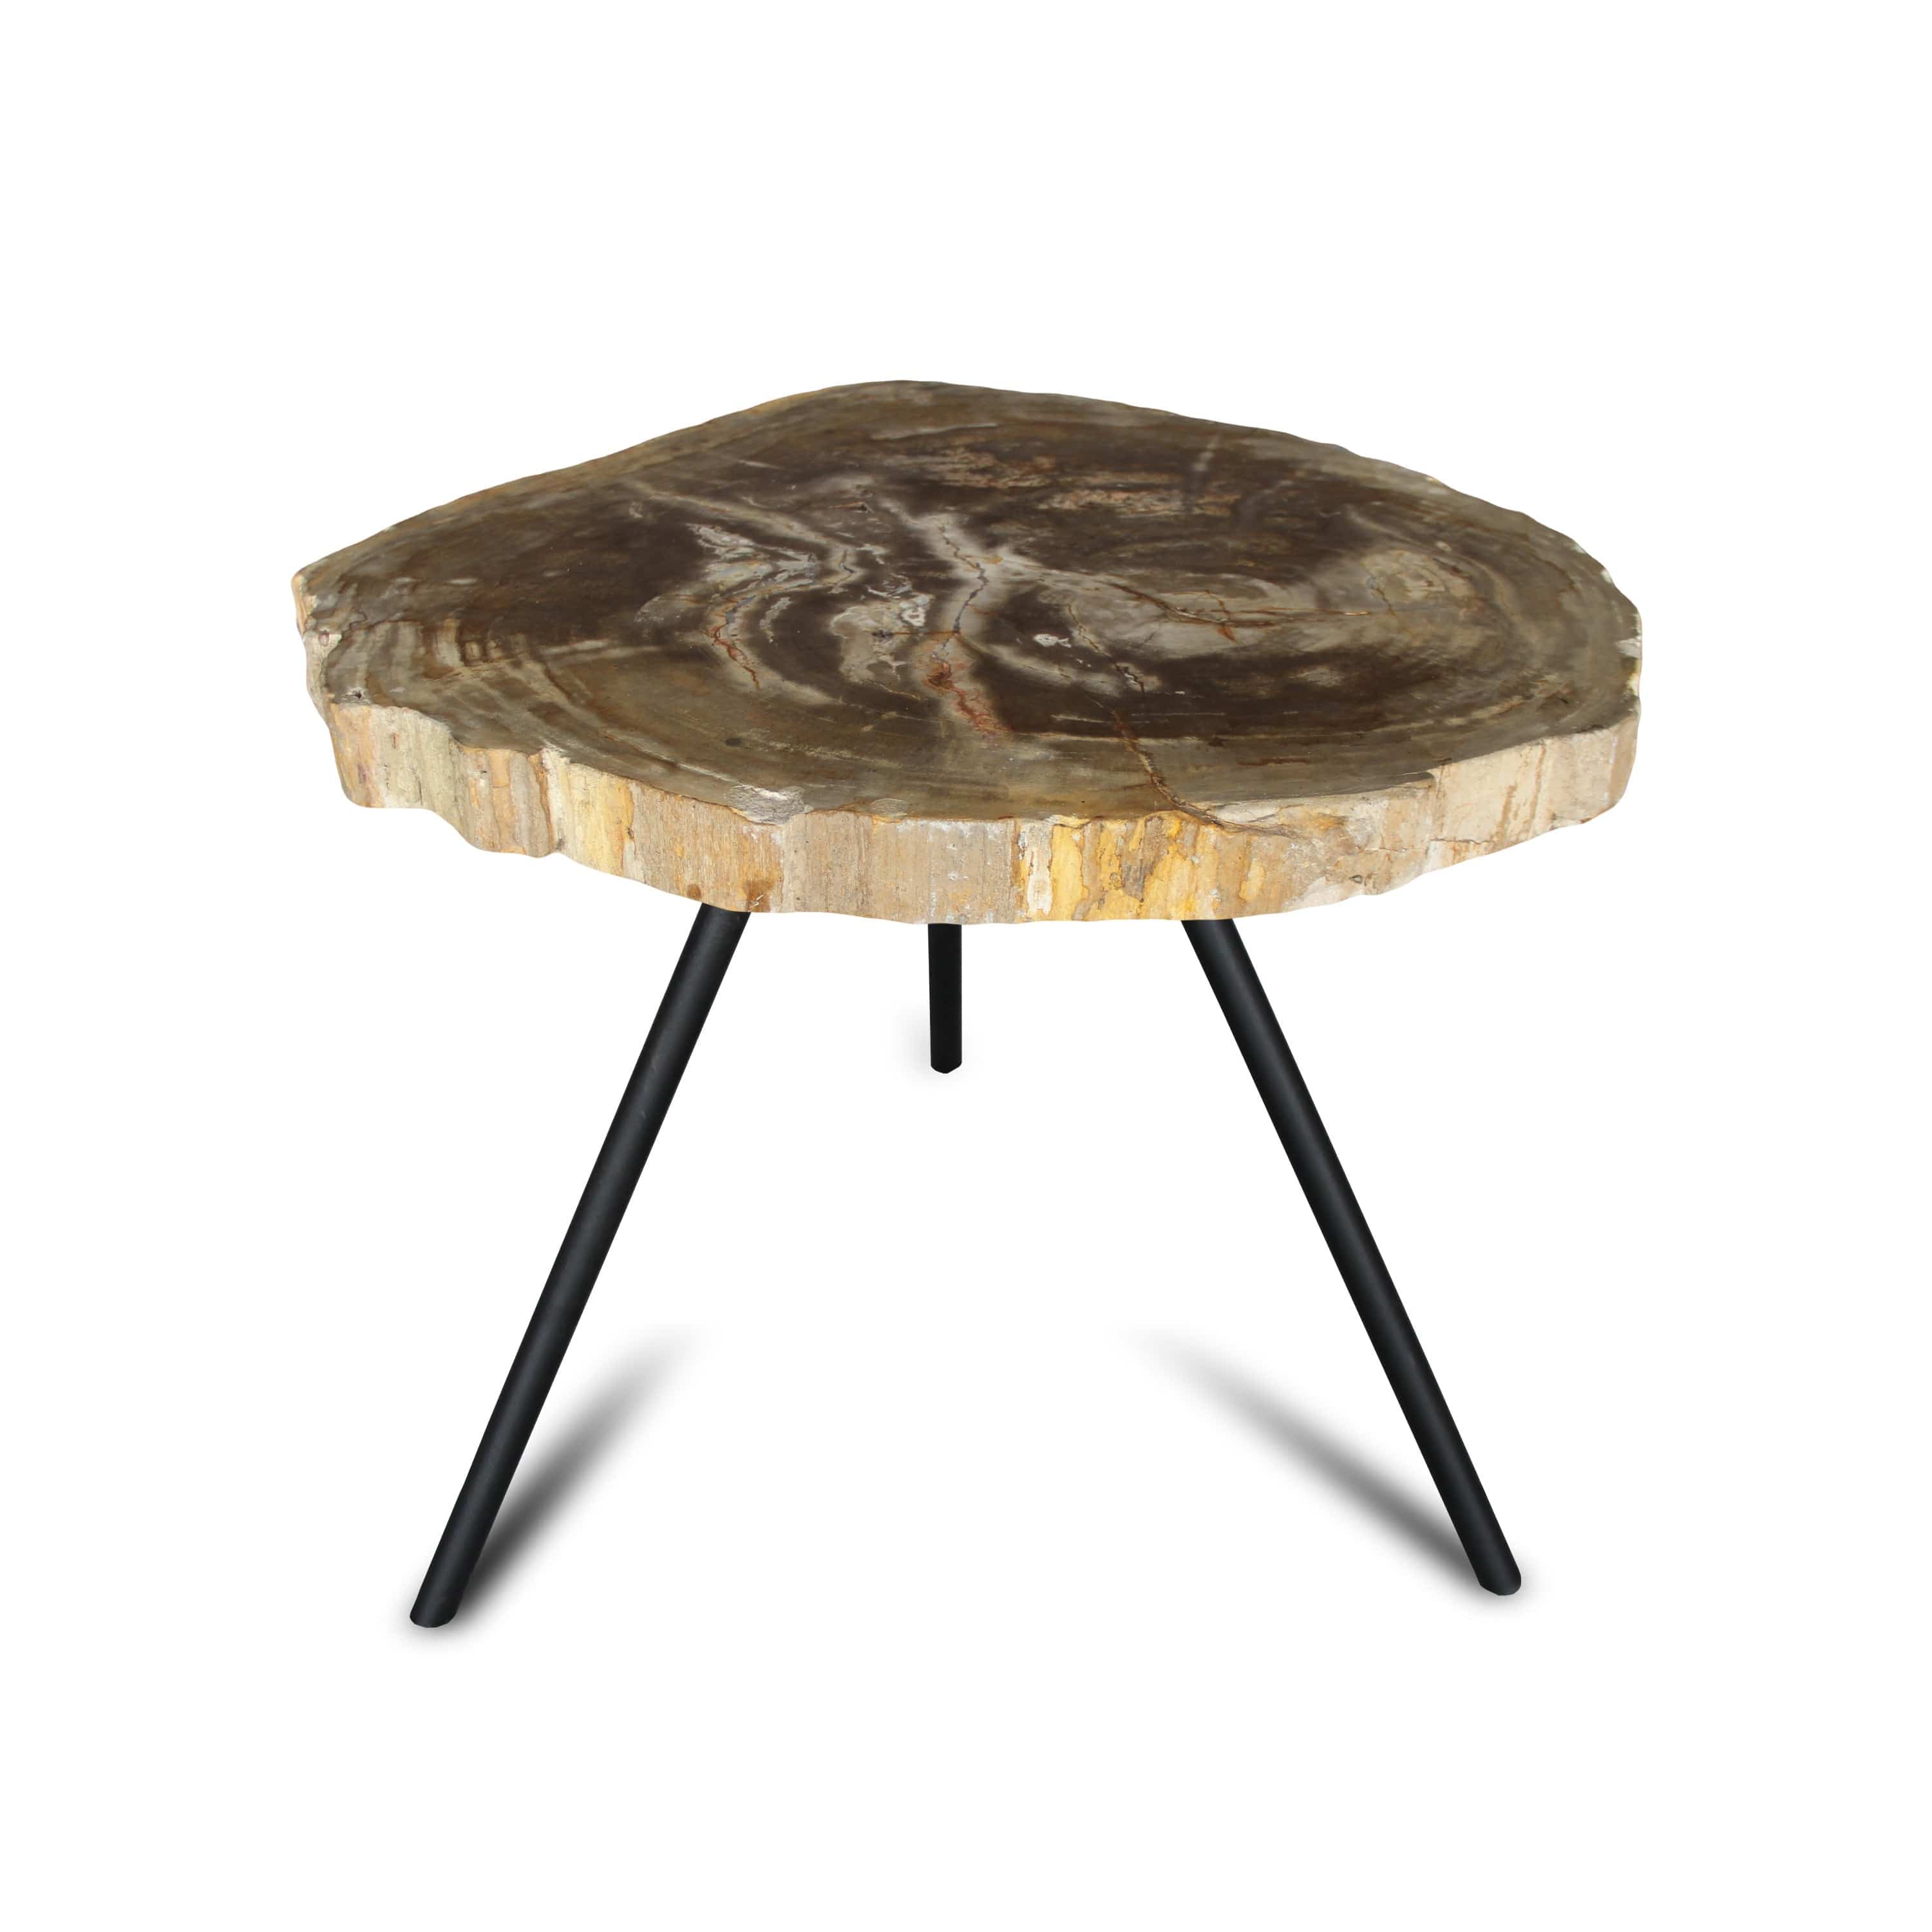 Kalifano Petrified Wood Petrified Wood Round Slice Side Table from Indonesia - 29" / 92 lbs PWT3400.001